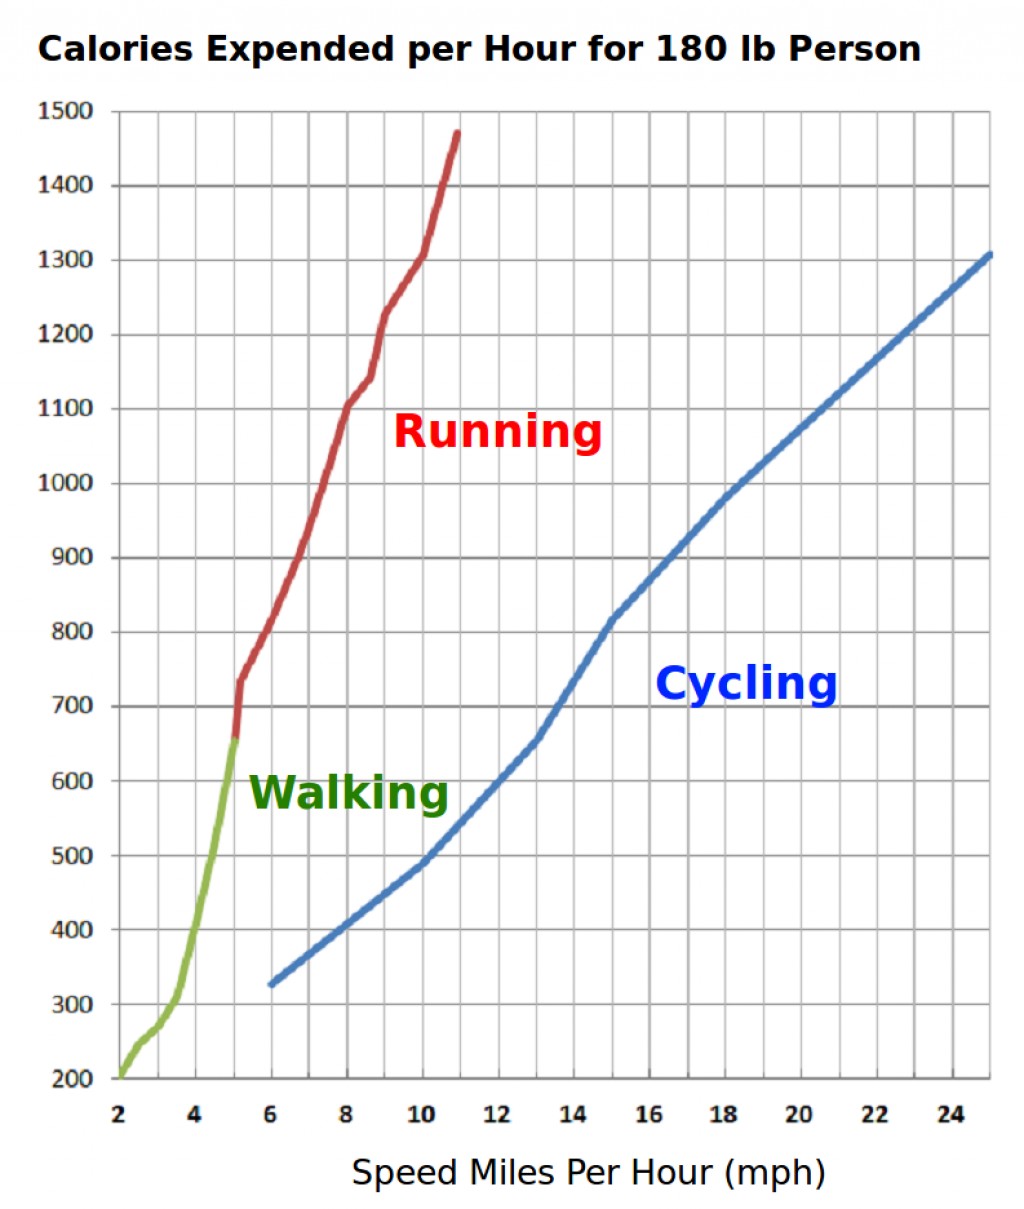 Rate of energy expenditure for various speeds for walking, running and cycling ( 180 lb person)